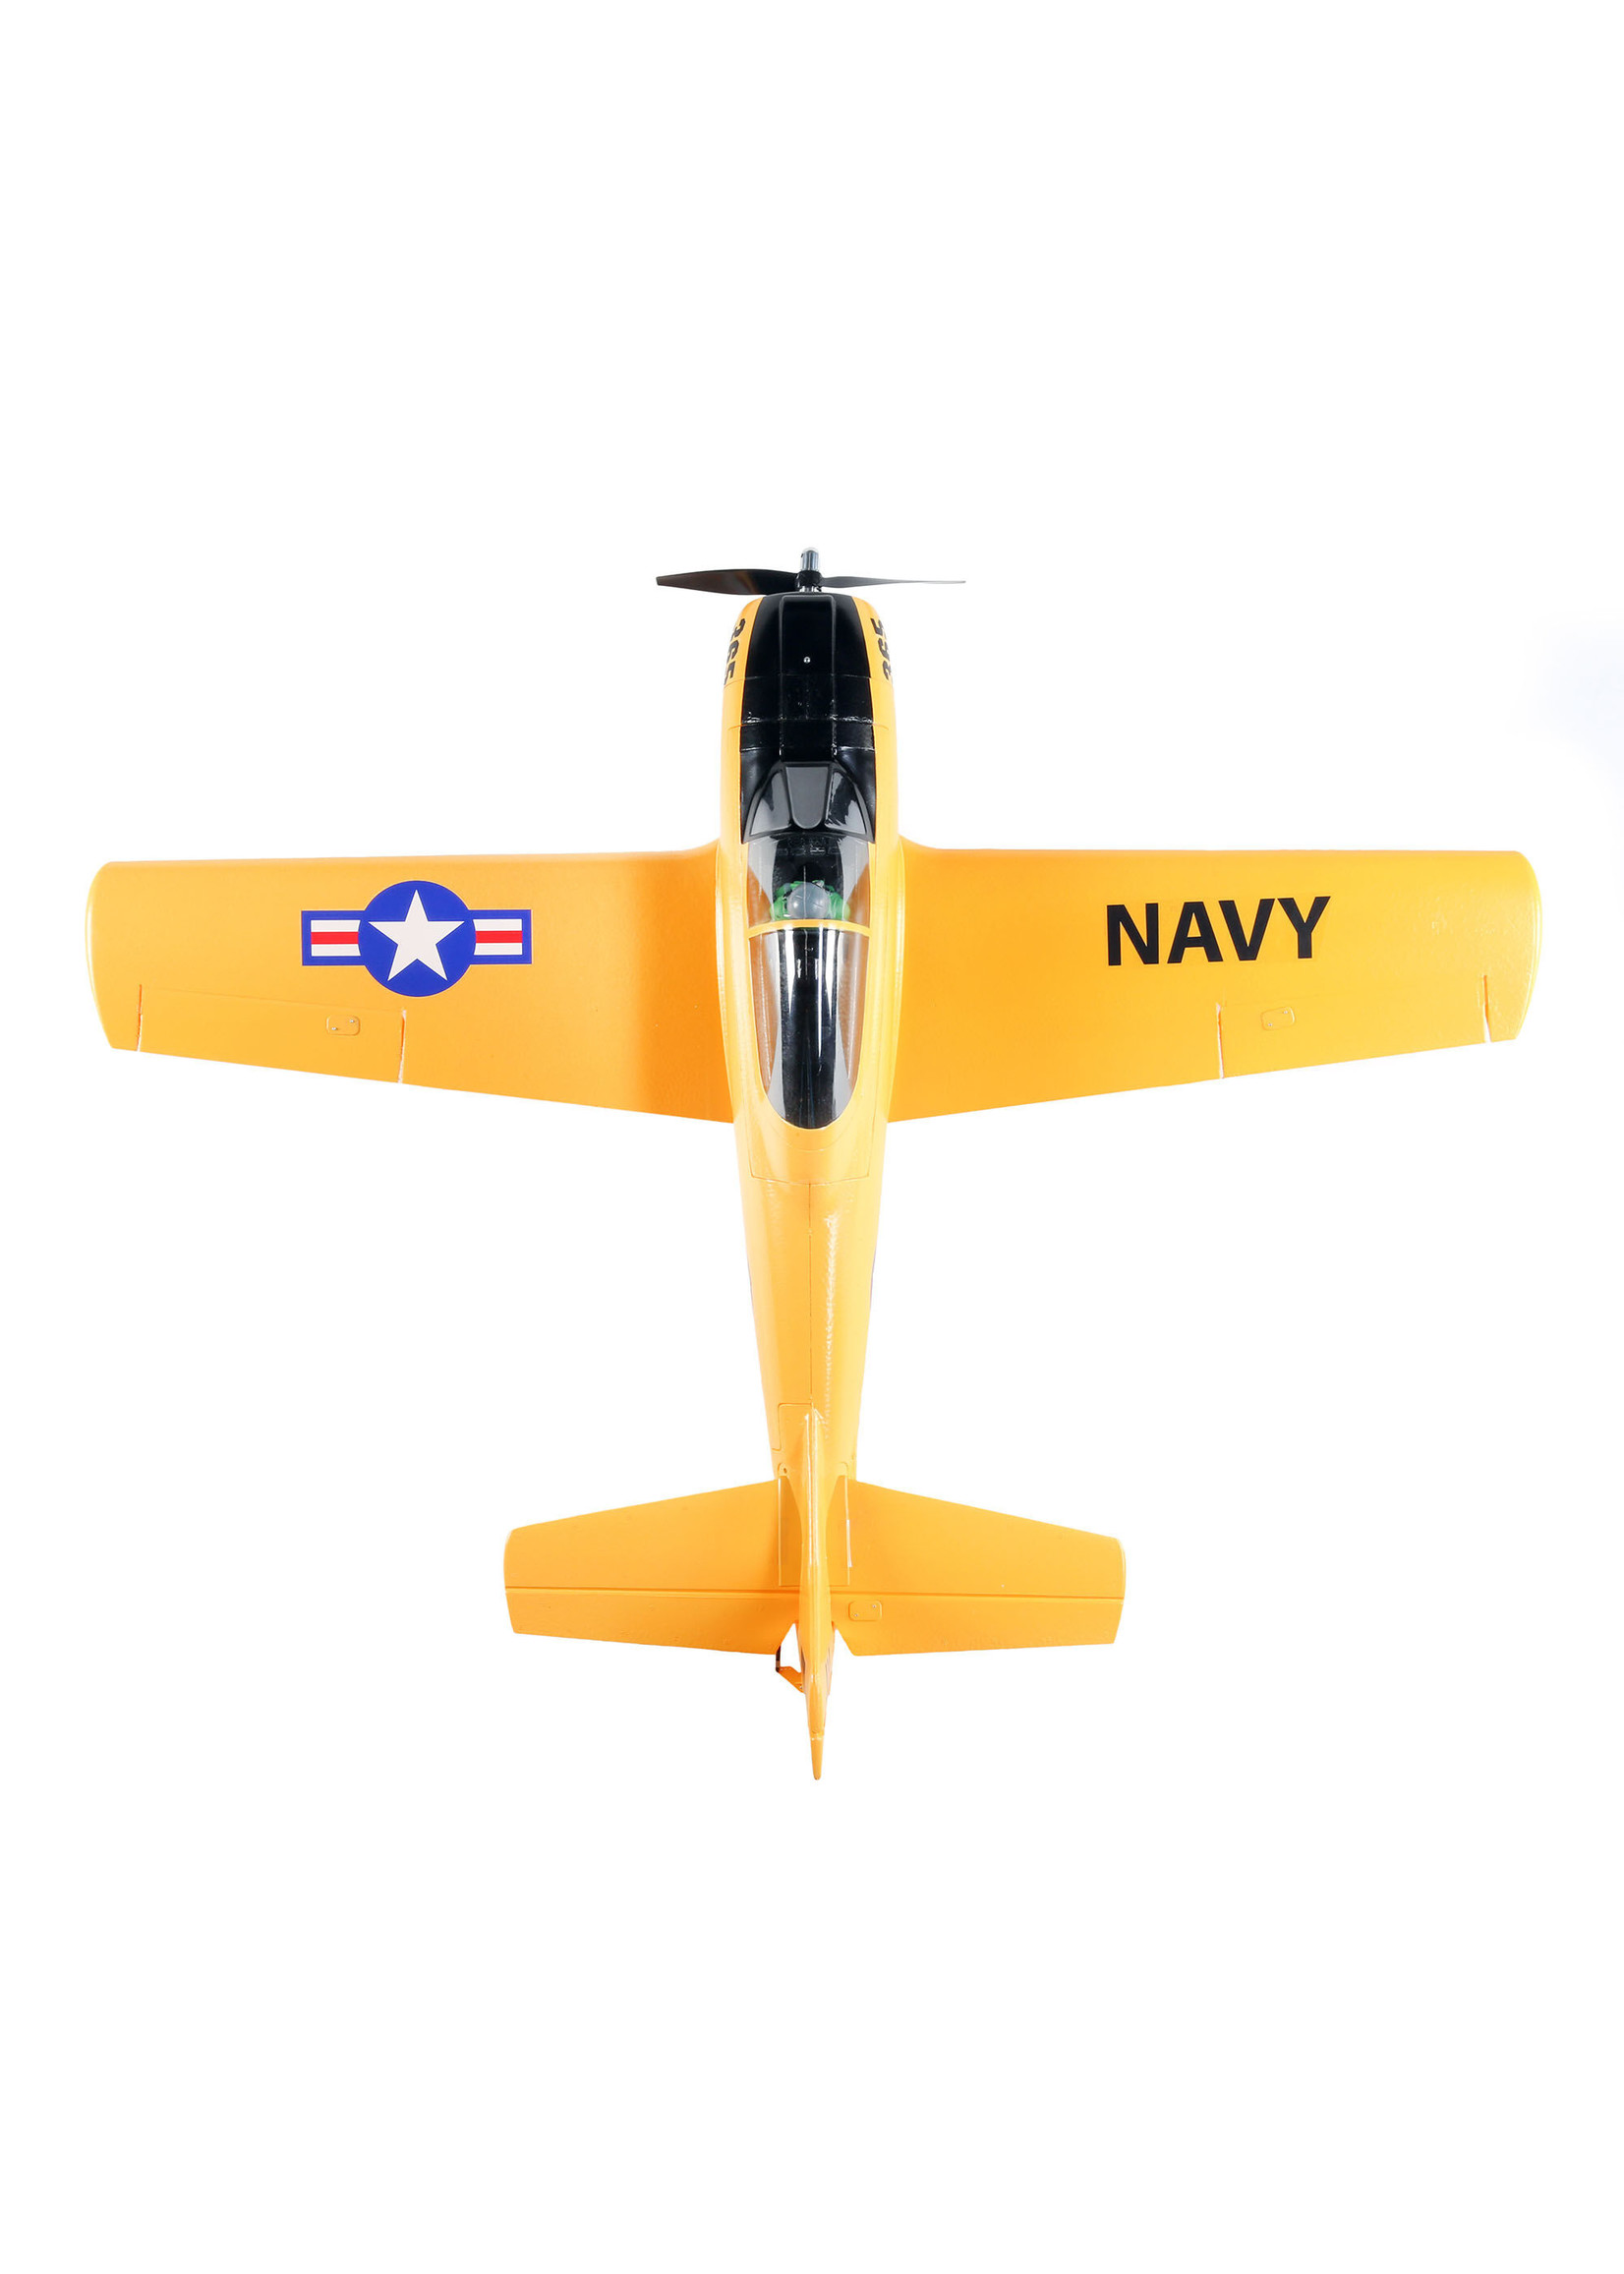 E-flite EFL08250 - T-28 Trojan 1.1m BNF Basic with AS3X and SAFE Select